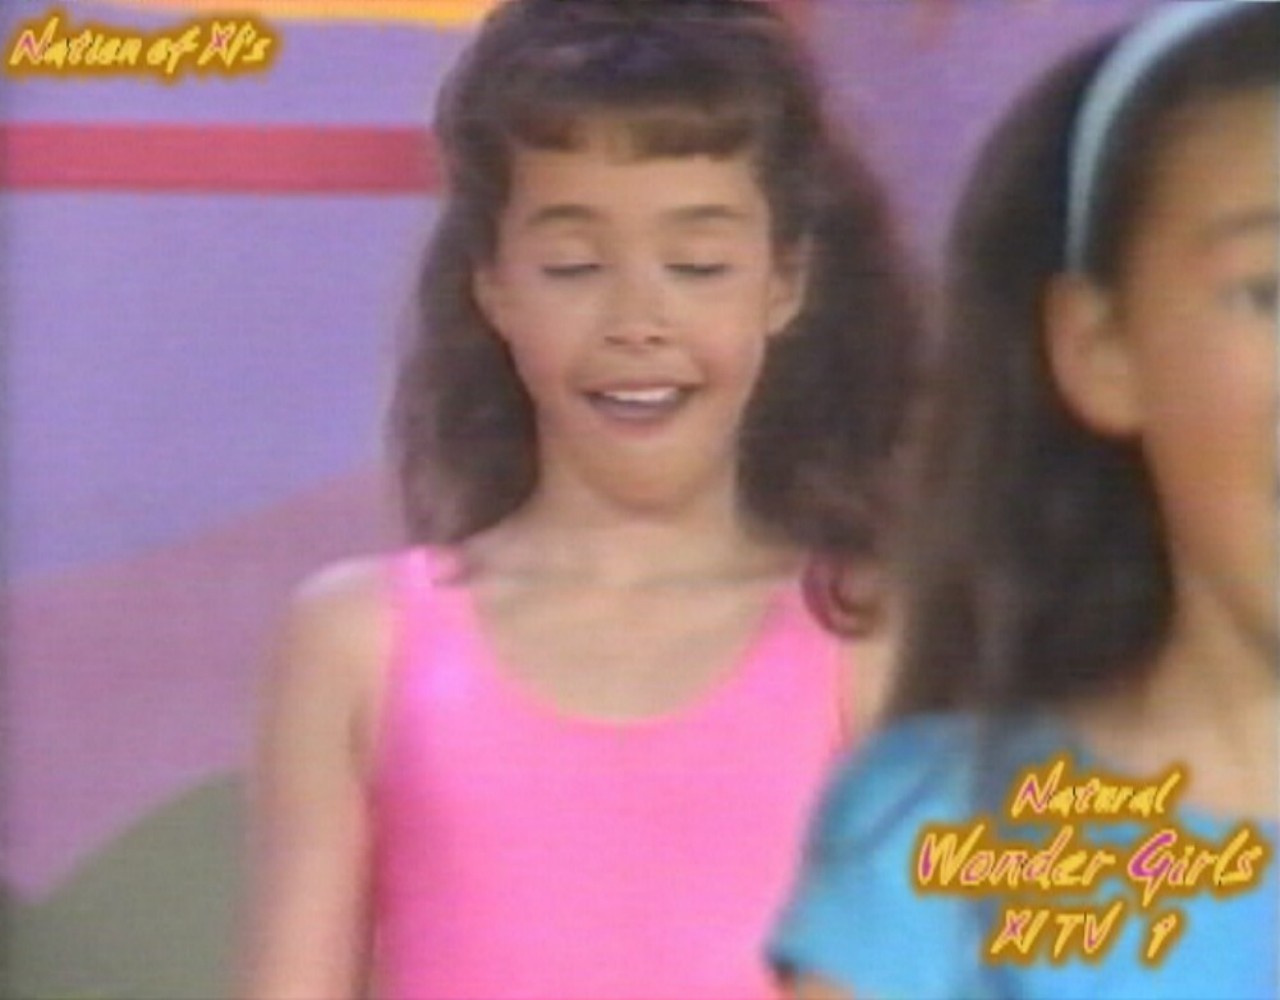 Natural Wonder Girls! Dance Workout! "Barbie Gets Nine Inch Nailed!" - XITV Jumps On Your Face and Squirts Down Your Throat!" 